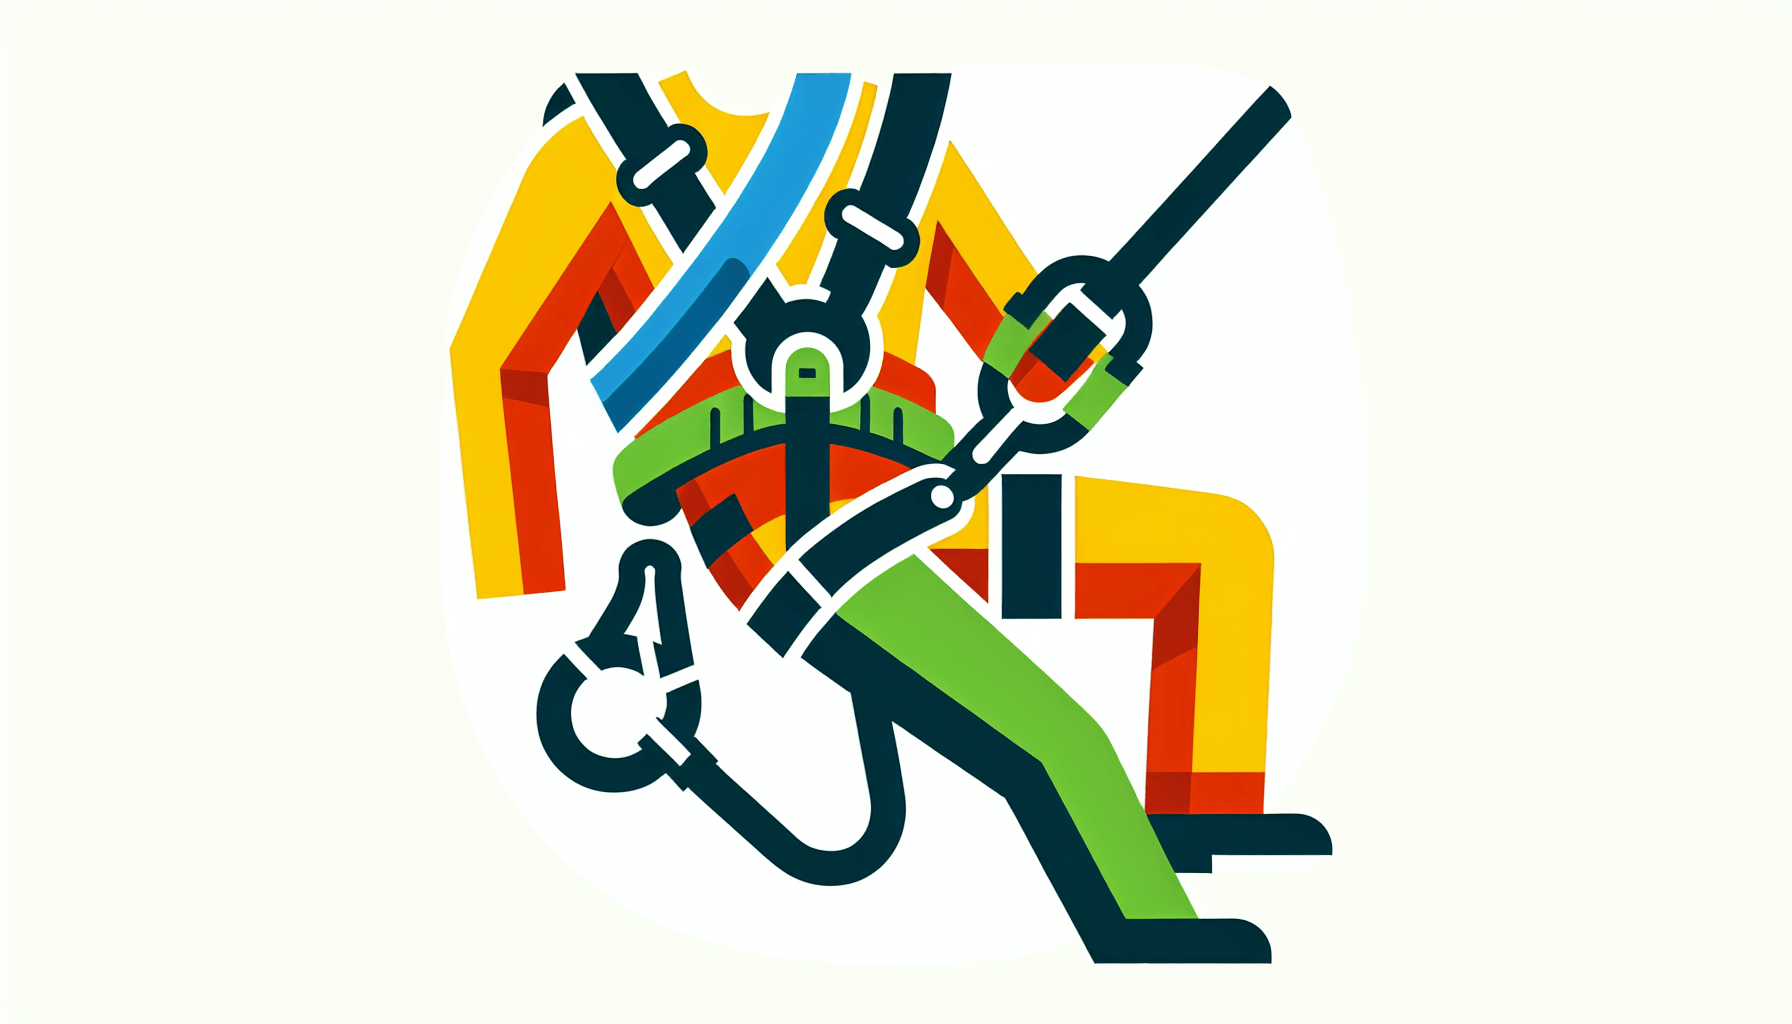 Rappelling harness in flat illustration style and white background, red #f47574, green #88c7a8, yellow #fcc44b, and blue #645bc8 colors.